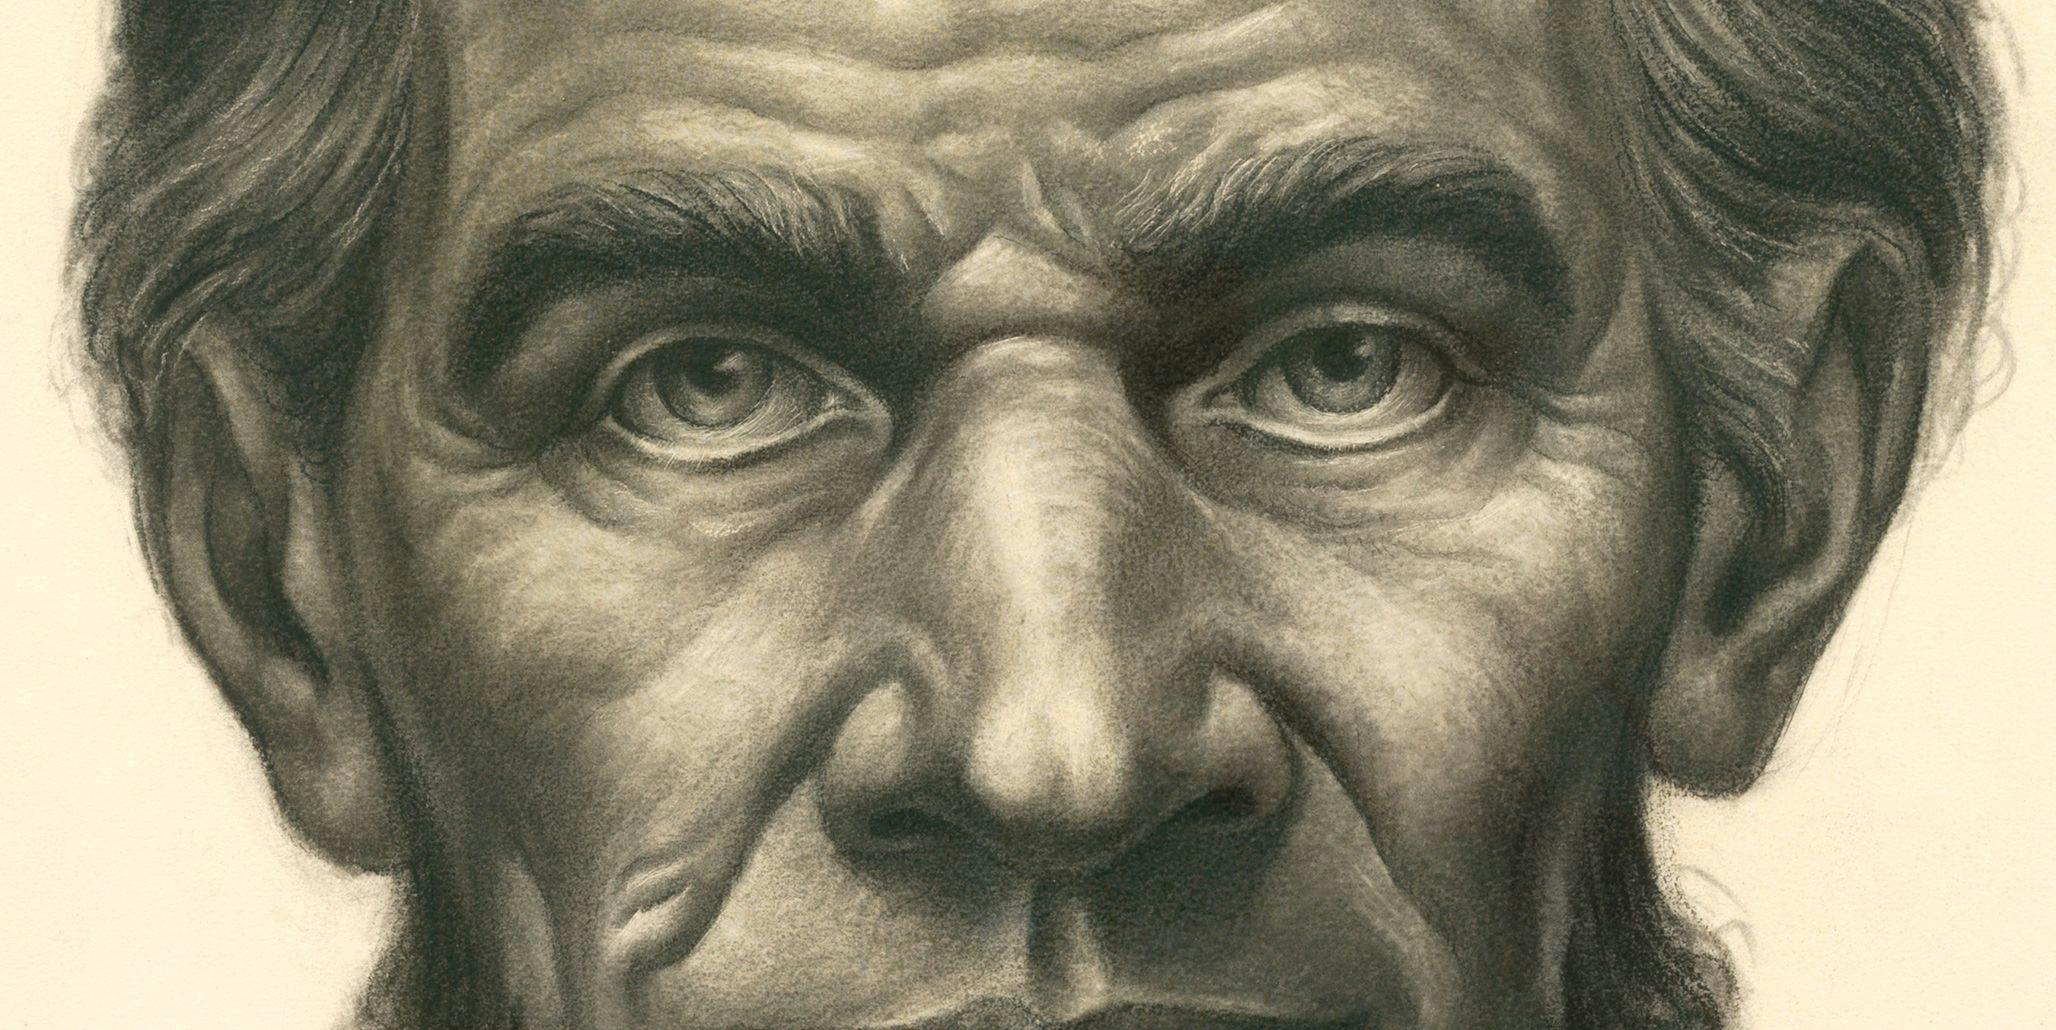 A detail of an artwork by Charles White, titled Abraham Lincoln, dated 1952.